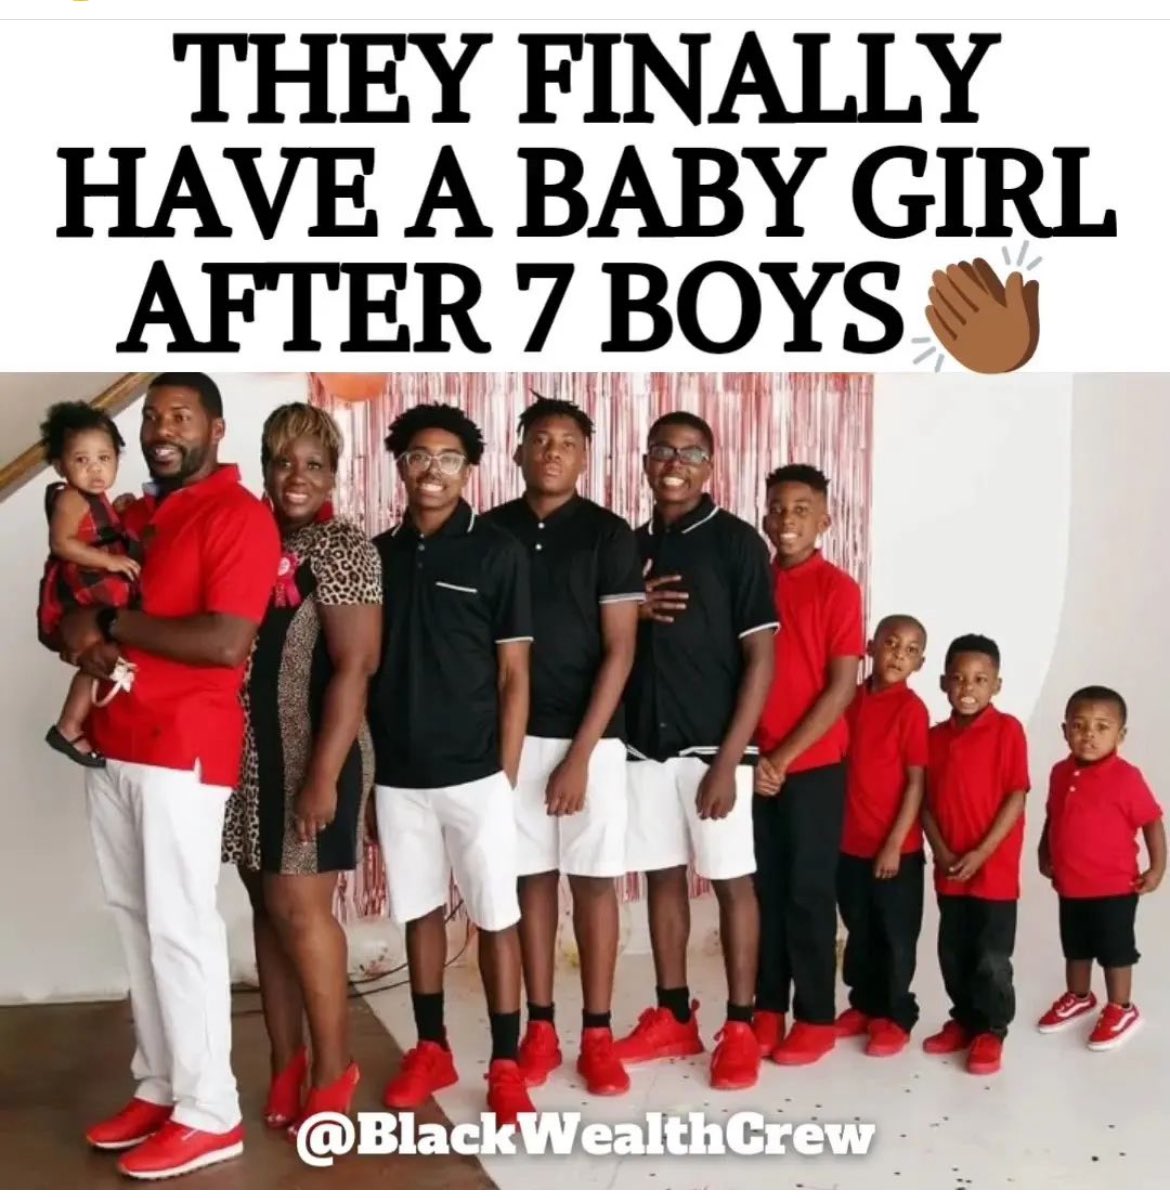 She will be the most protected babygirl ever! ☺️
#BlackFamilies 
#BlackLove
#BlackCulture